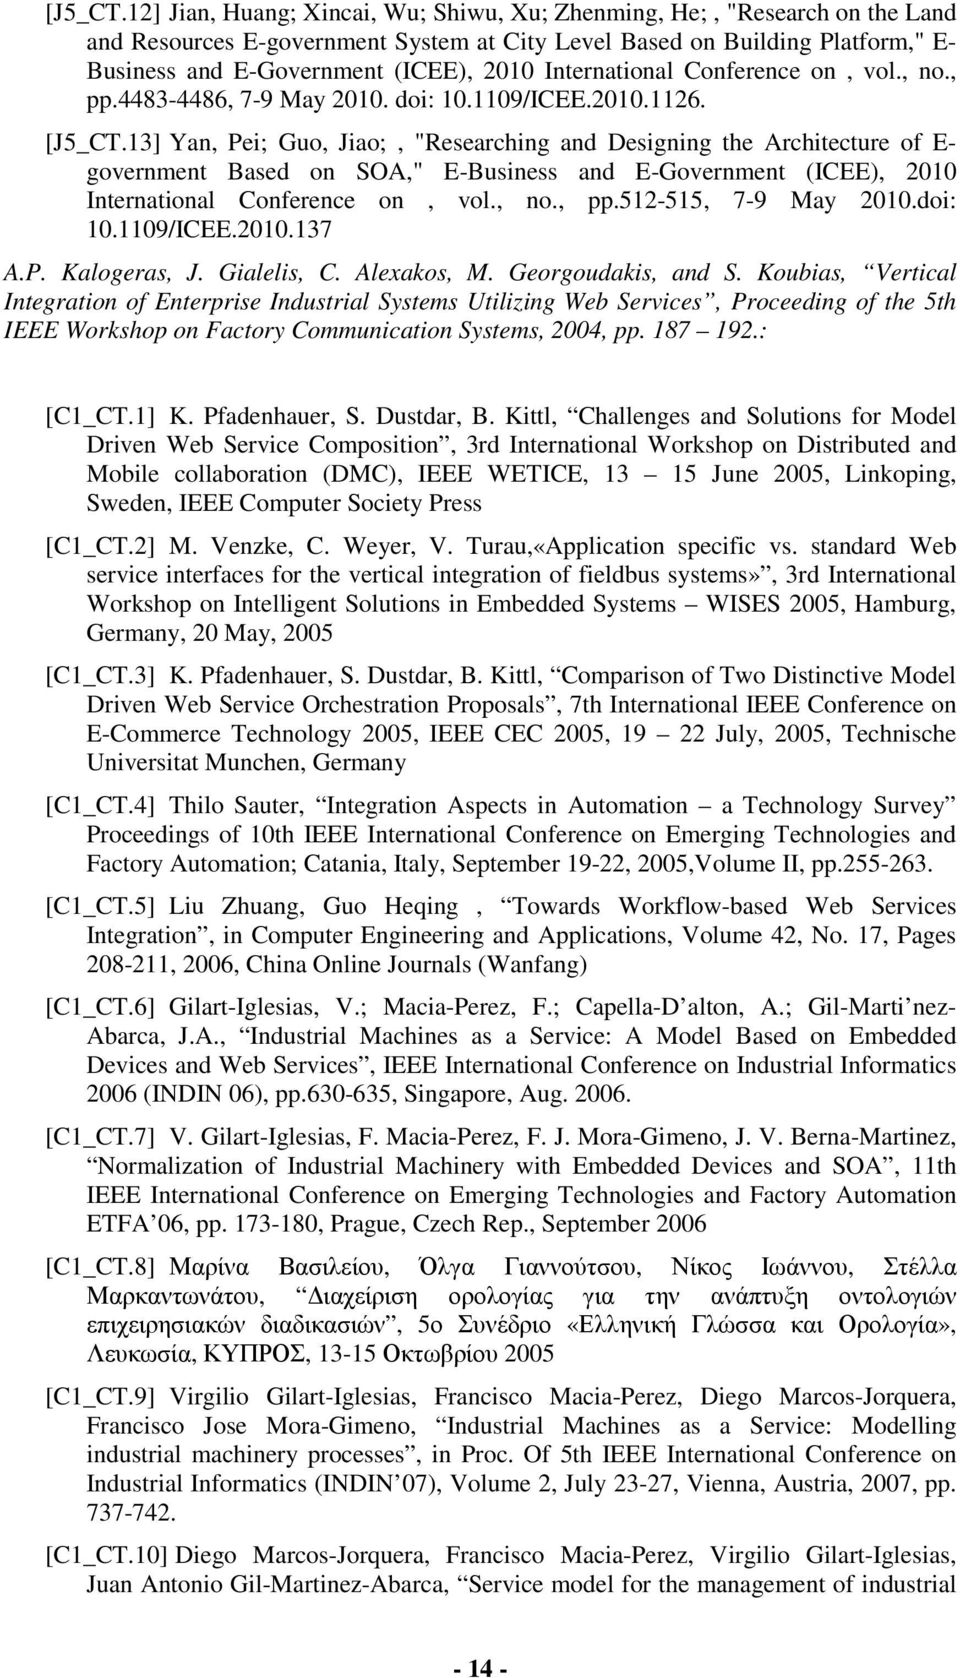 International Conference on, vol., no., pp.4483-4486, 7-9 May 2010. doi: 10.1109/ICEE.2010.1126.